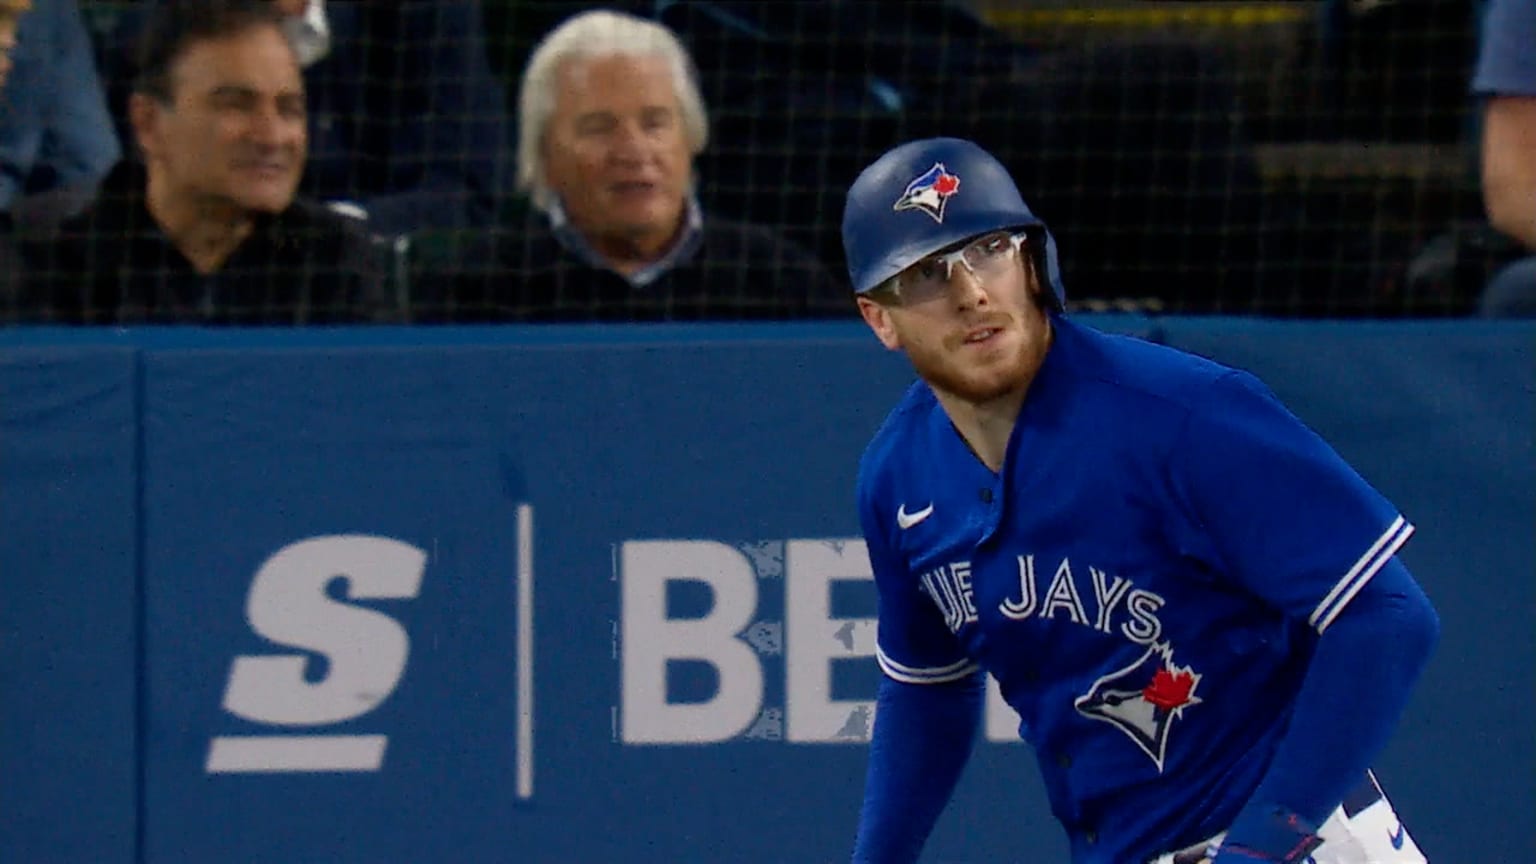 Danny Jansen homers twice as Blue Jays lose to Orioles